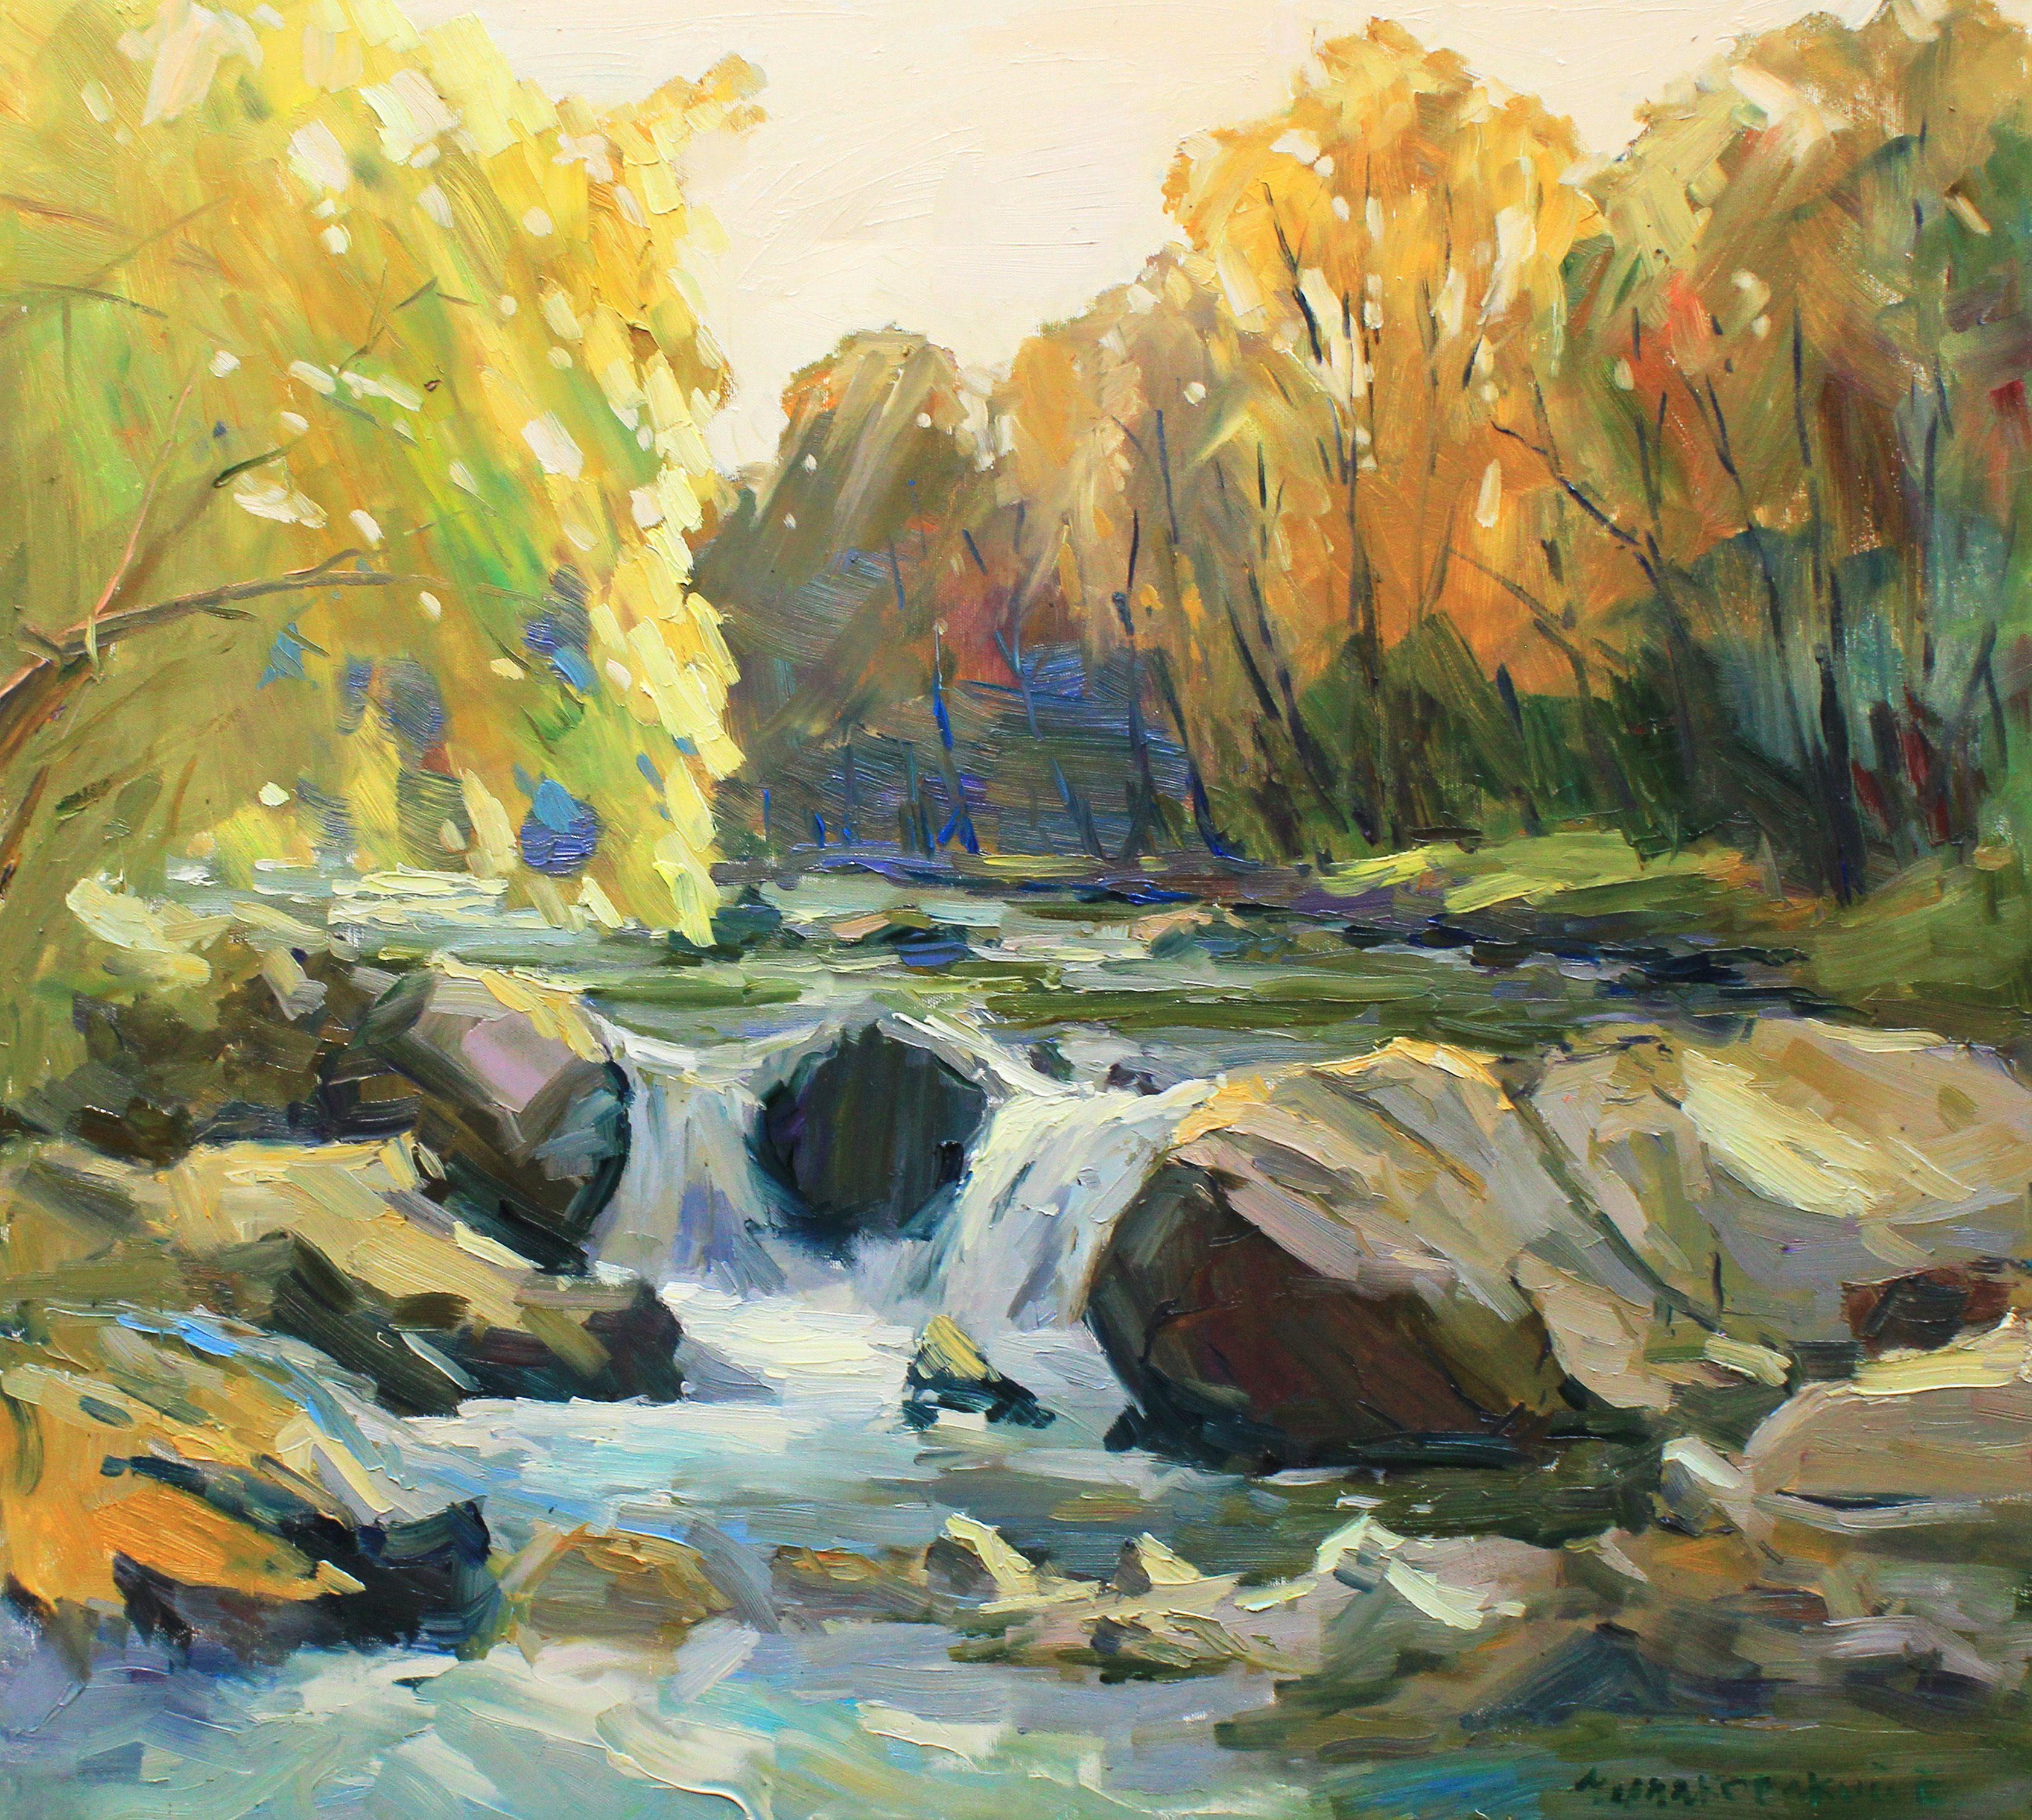 Original Oil painting by Ukrainian artist Evgeny Chernyakovsky    " river"  70.0 X 80.0 CM / 27.5 X 31.4 IN  HIGH QUALITY oil on canvas  Signed on the front and back  Dated 2021  Good condition  GUARANTEE OF AUTHENTICITY :: Painting :: Impressionist